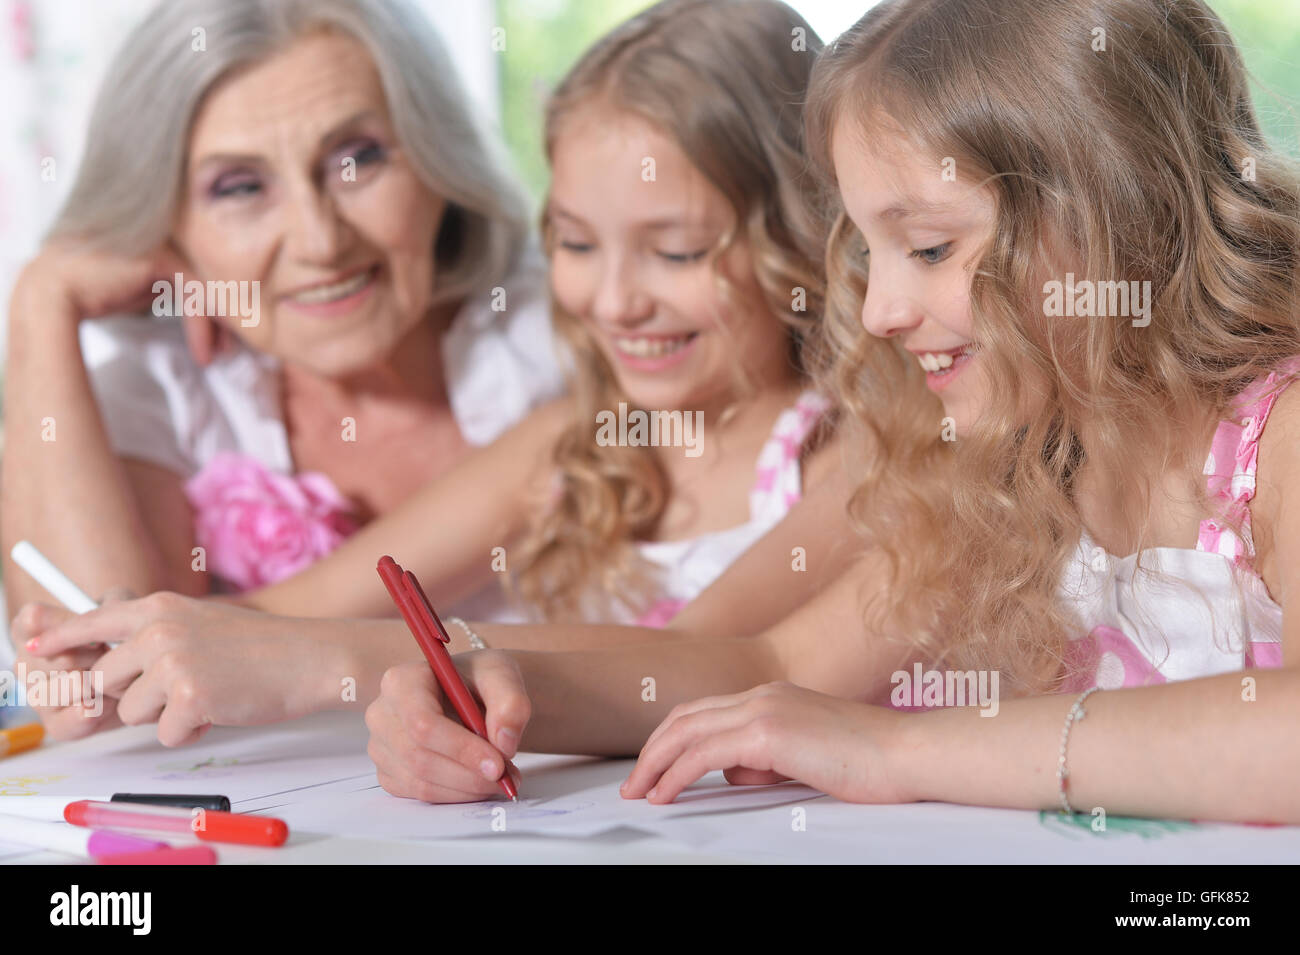 Old woman with tweenie   girls drawing Stock Photo